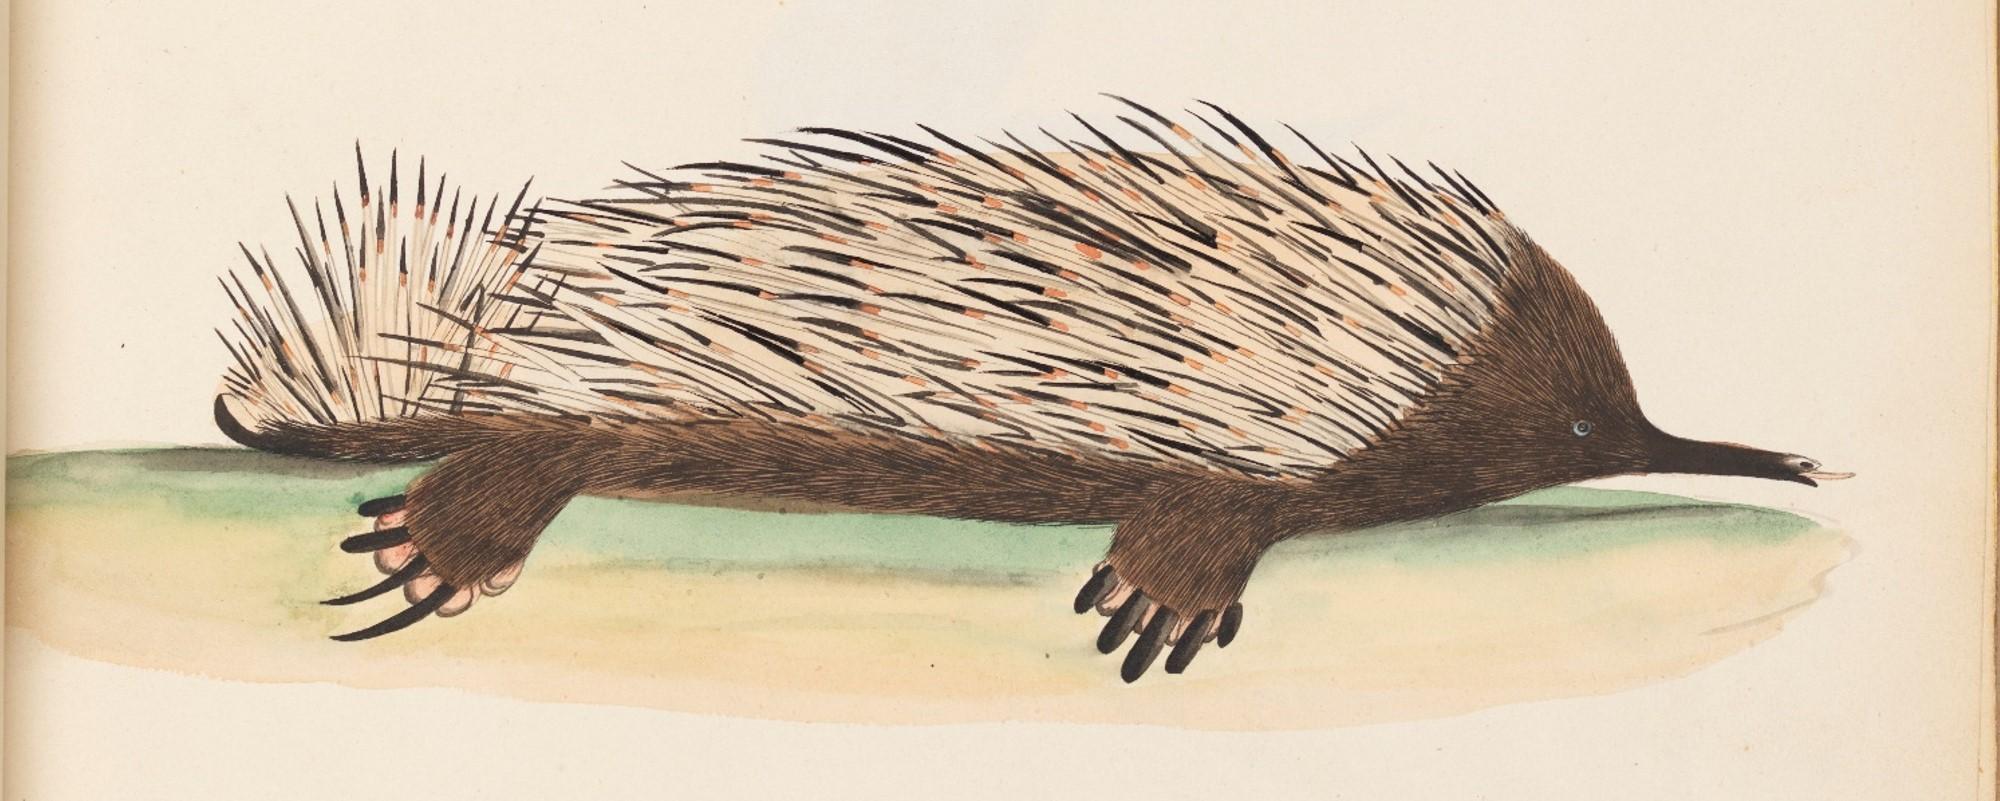 A watercolour image of an echidna, c. 1800. This early image of a monotreme mammal is now held by the State Library of New South Wales, 'The Lambert Drawings', folio 10. 